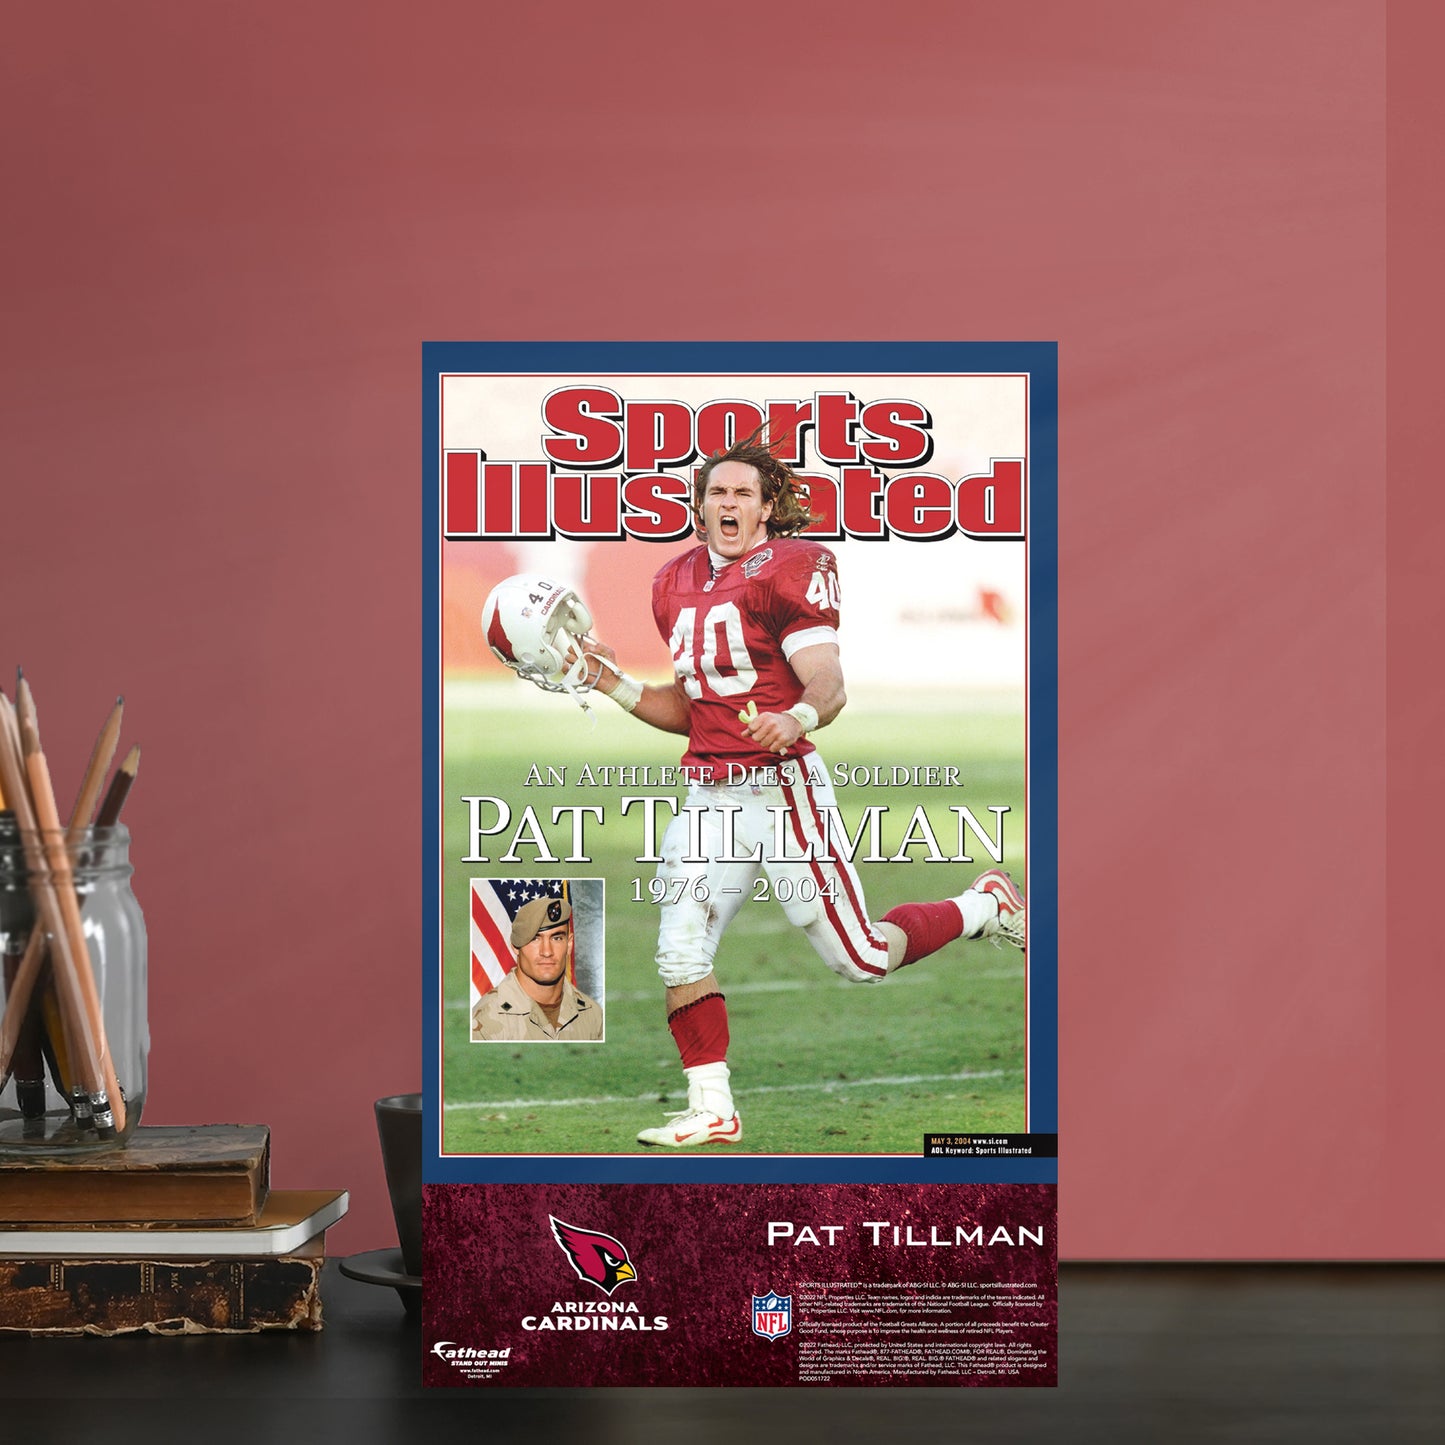 Arizona Cardinals: Pat Tillman May 2004 Sports Illustrated Cover Stand Out Mini Cardstock Cutout - Officially Licensed NFL Stand Out